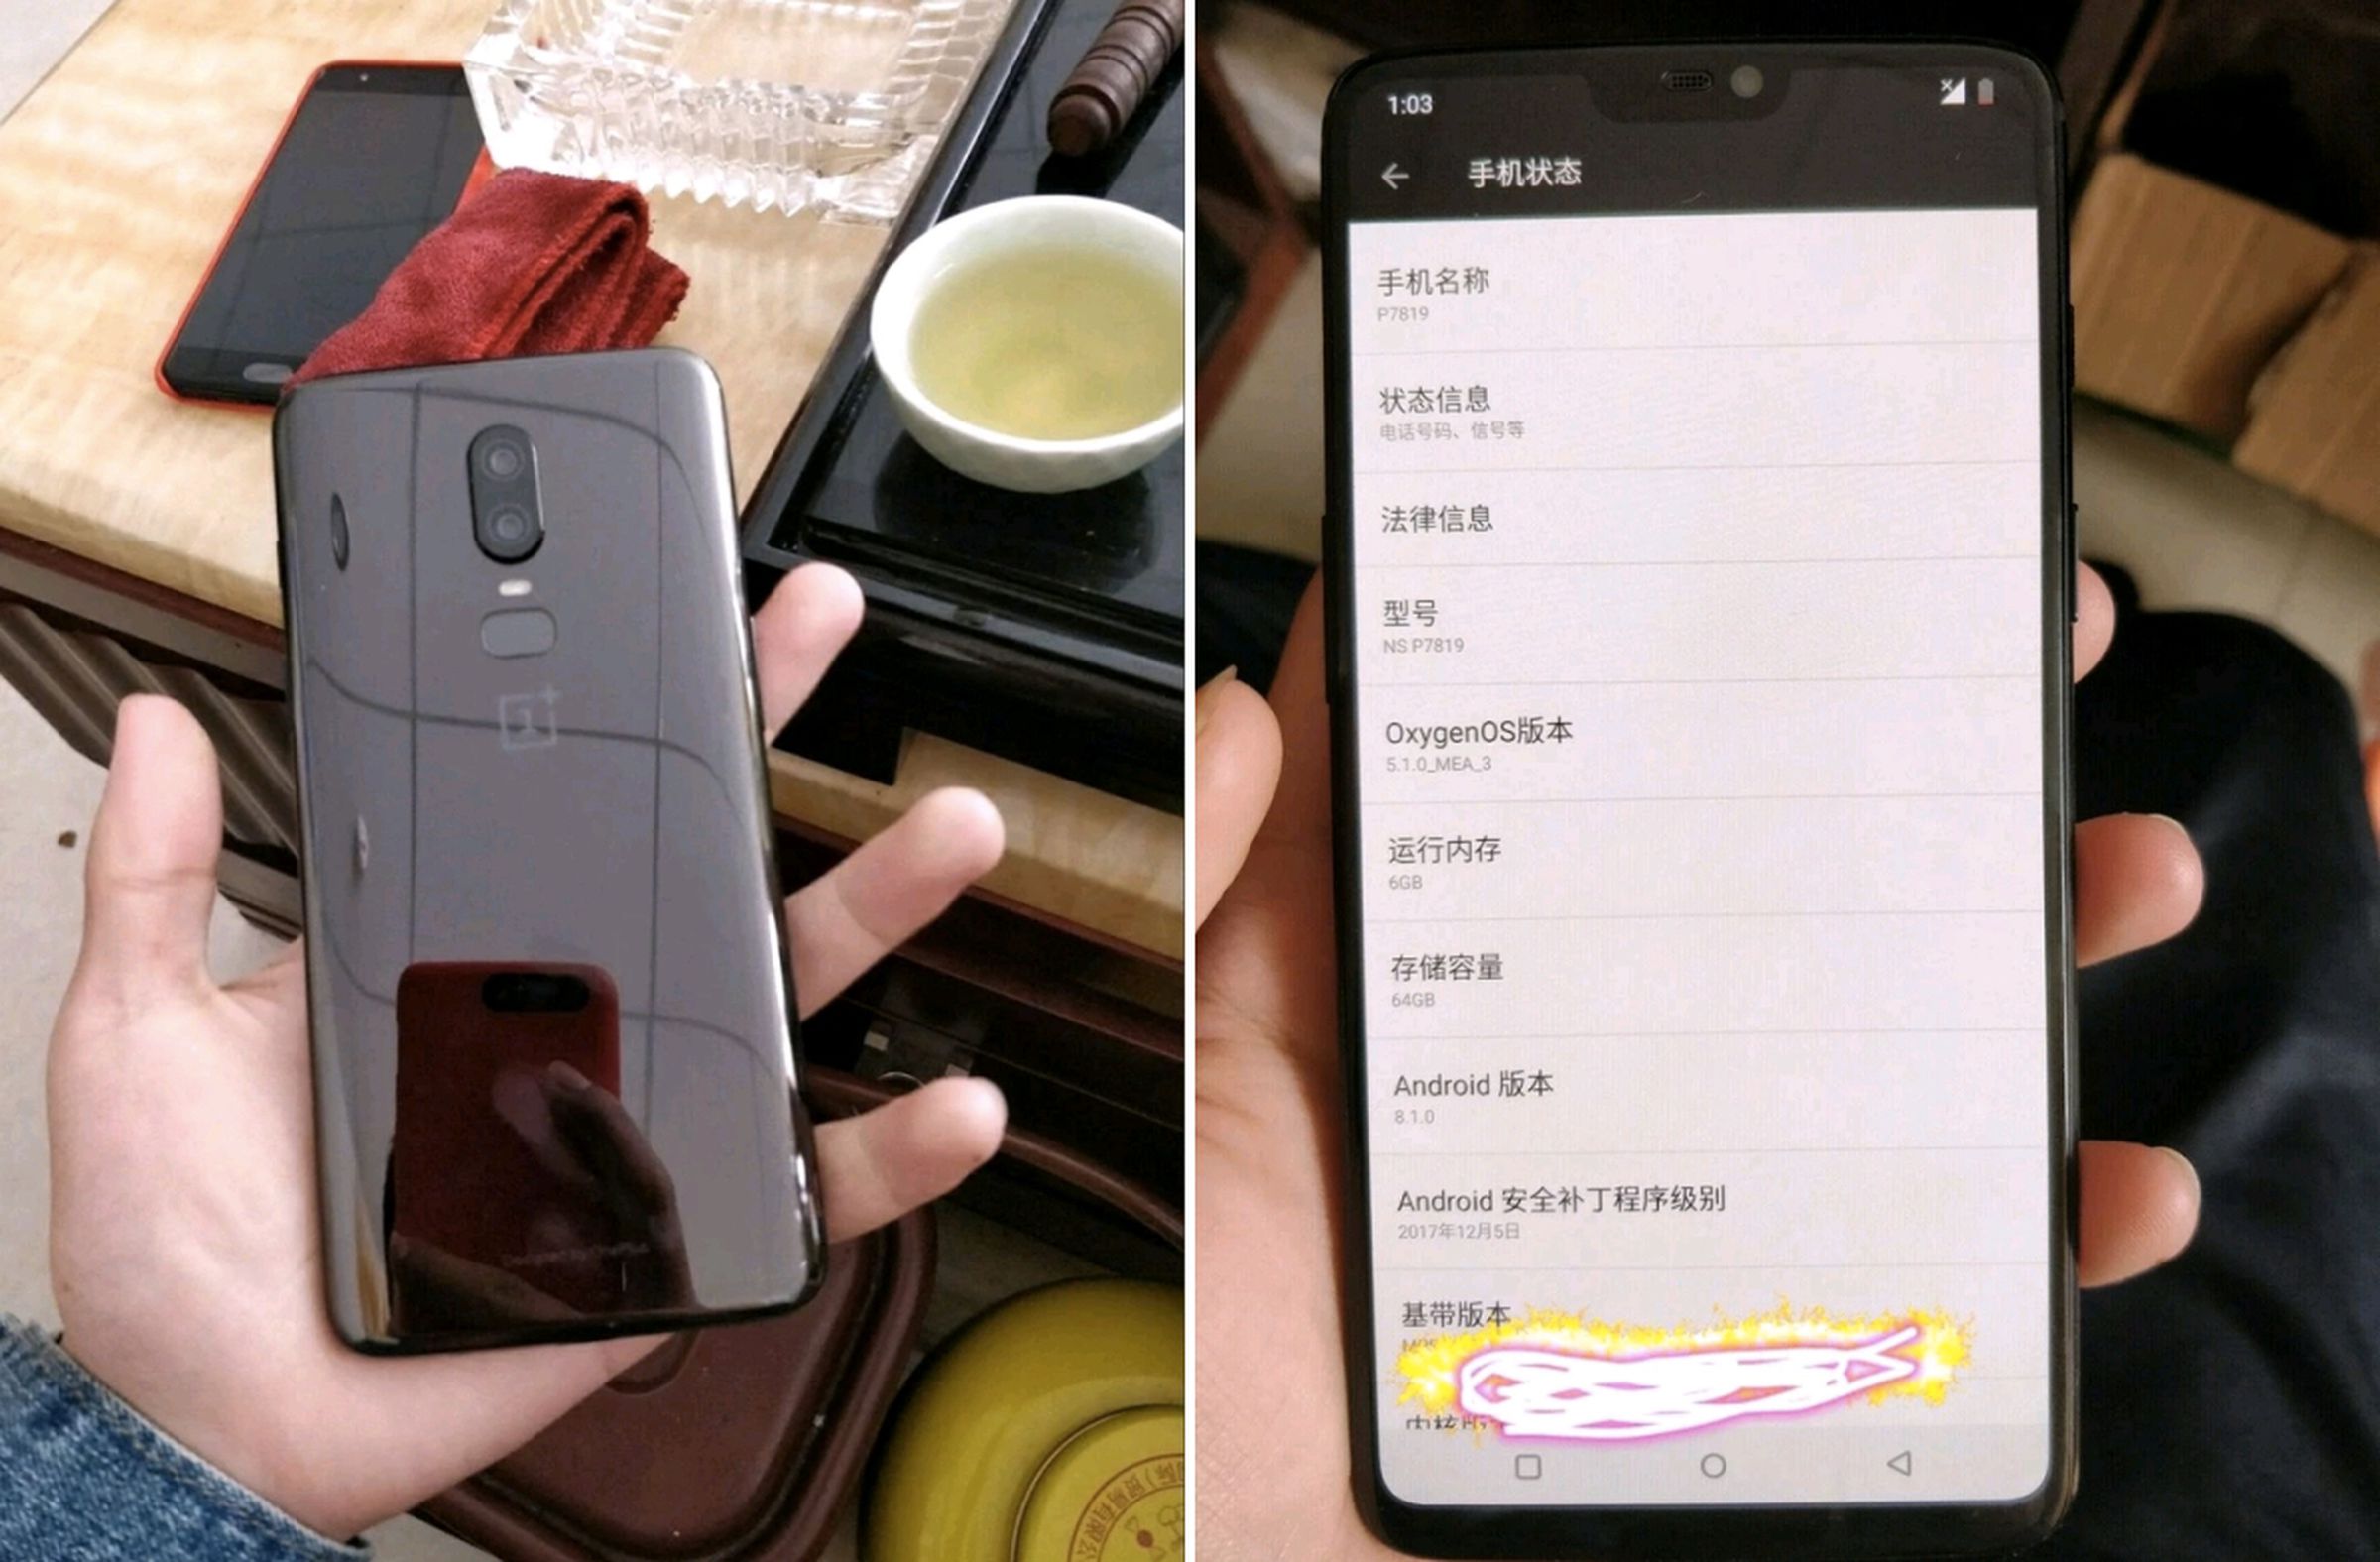 Leaked images supposedly showing the OnePlus 6, via ITHome.